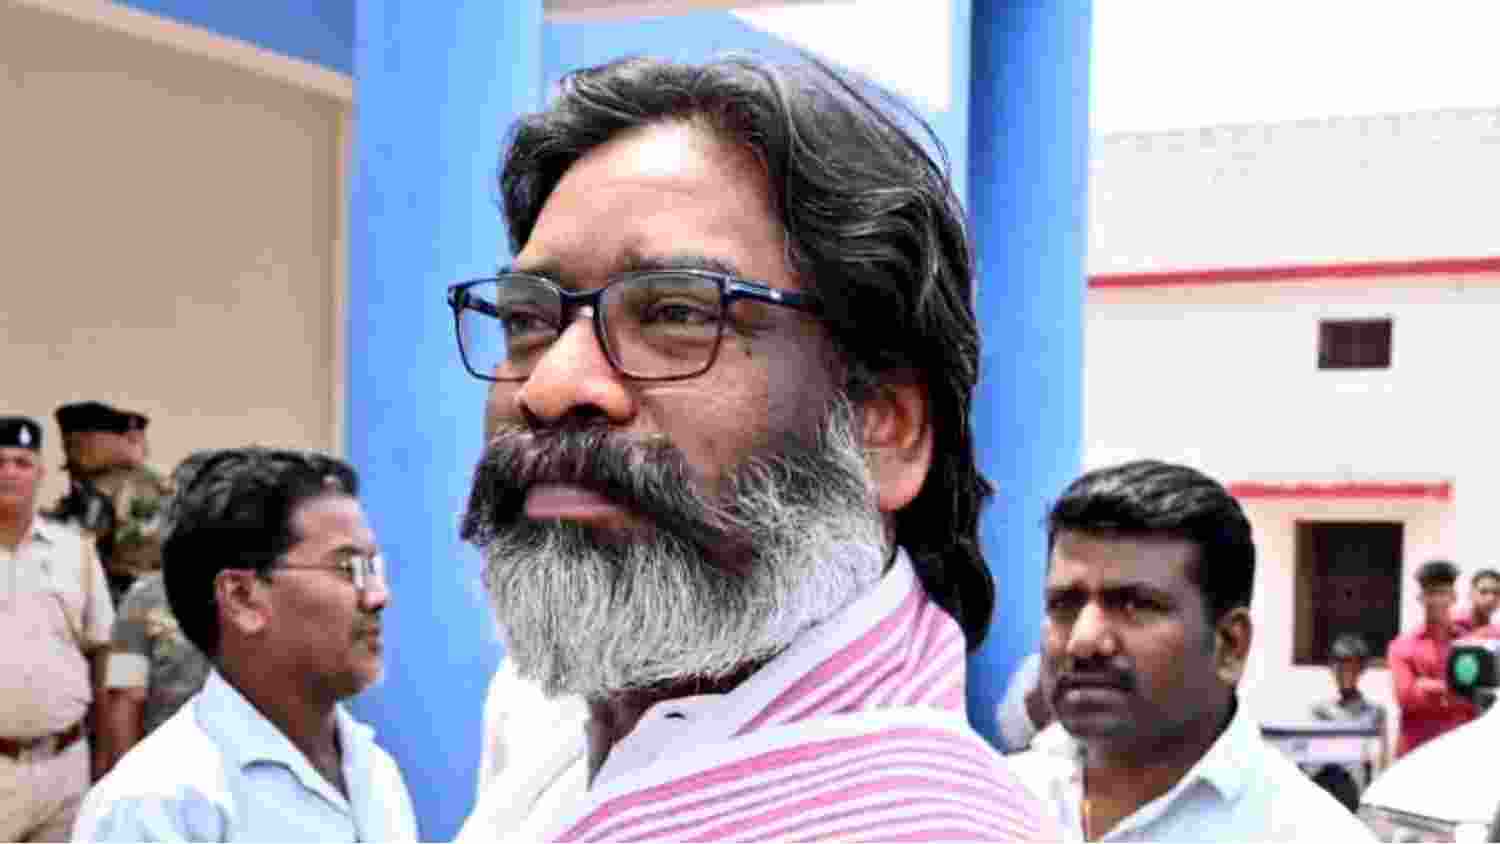 Hemant Soren appeals for bail to campaign, draws parallels with Kejriwal's case